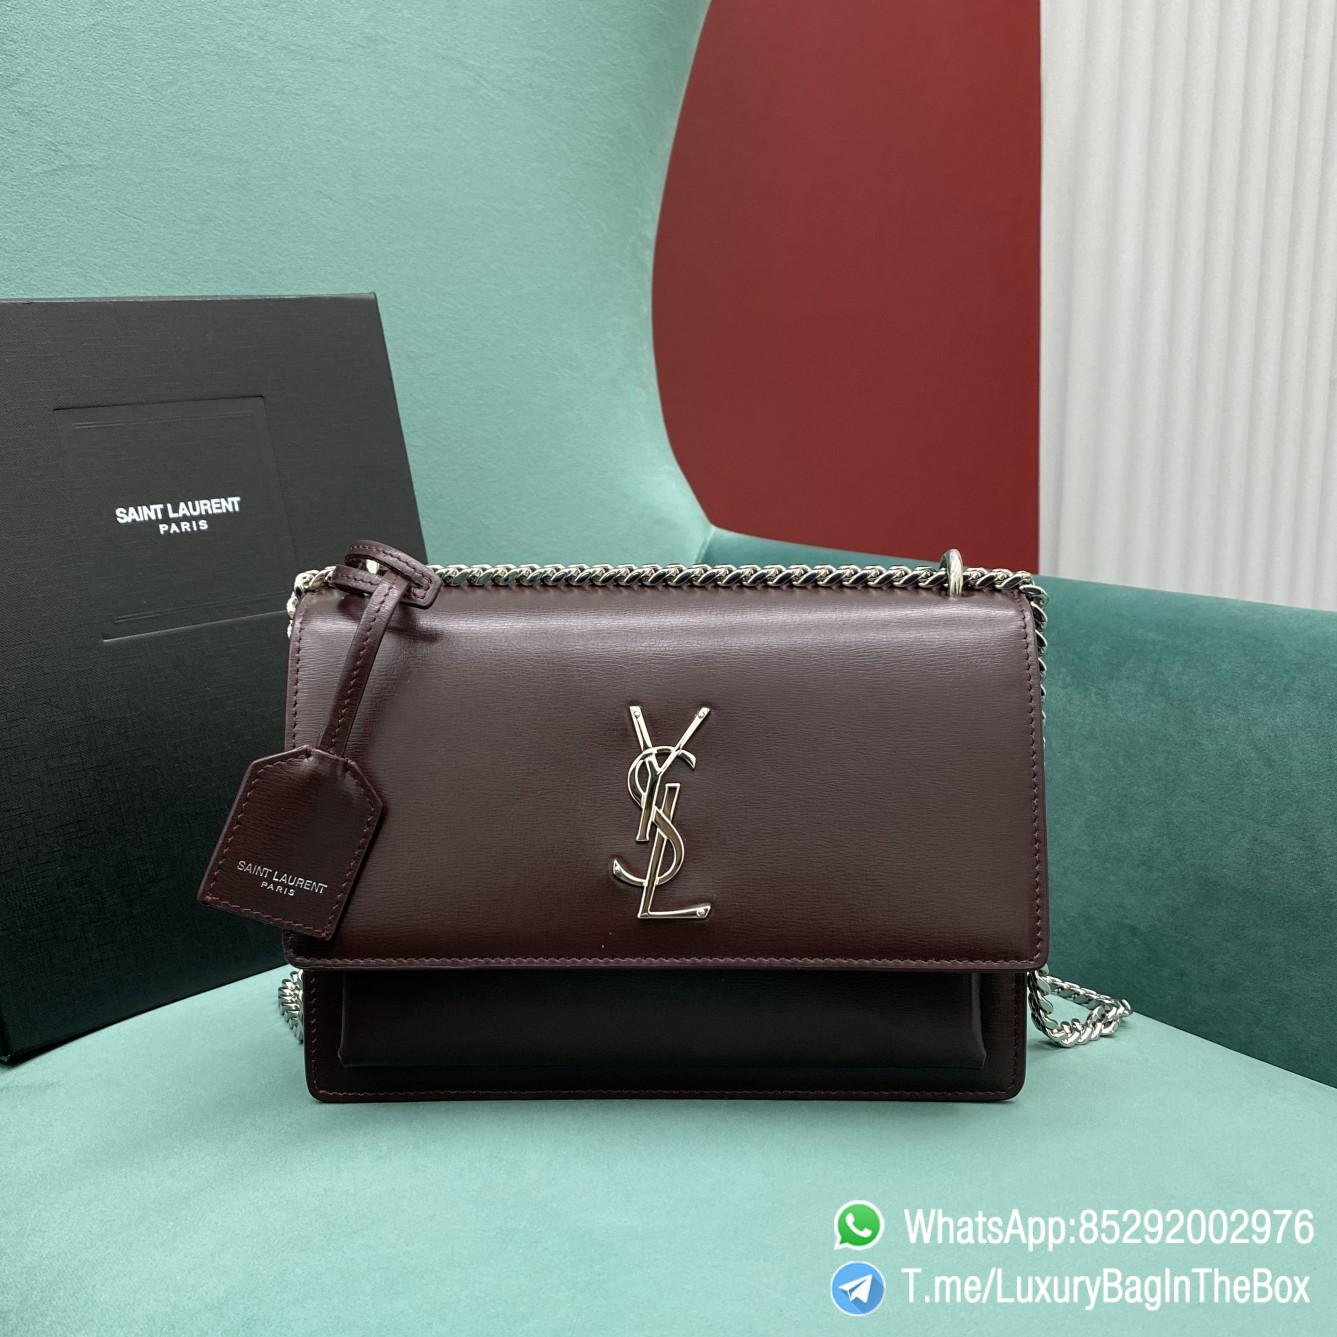 Best Replica YSL Sunset Handbag 442906 Rouge Legion Smooth Leather with Front Flap Chain and Leather Shoulder Strap Silver Metal YSL Initials 01